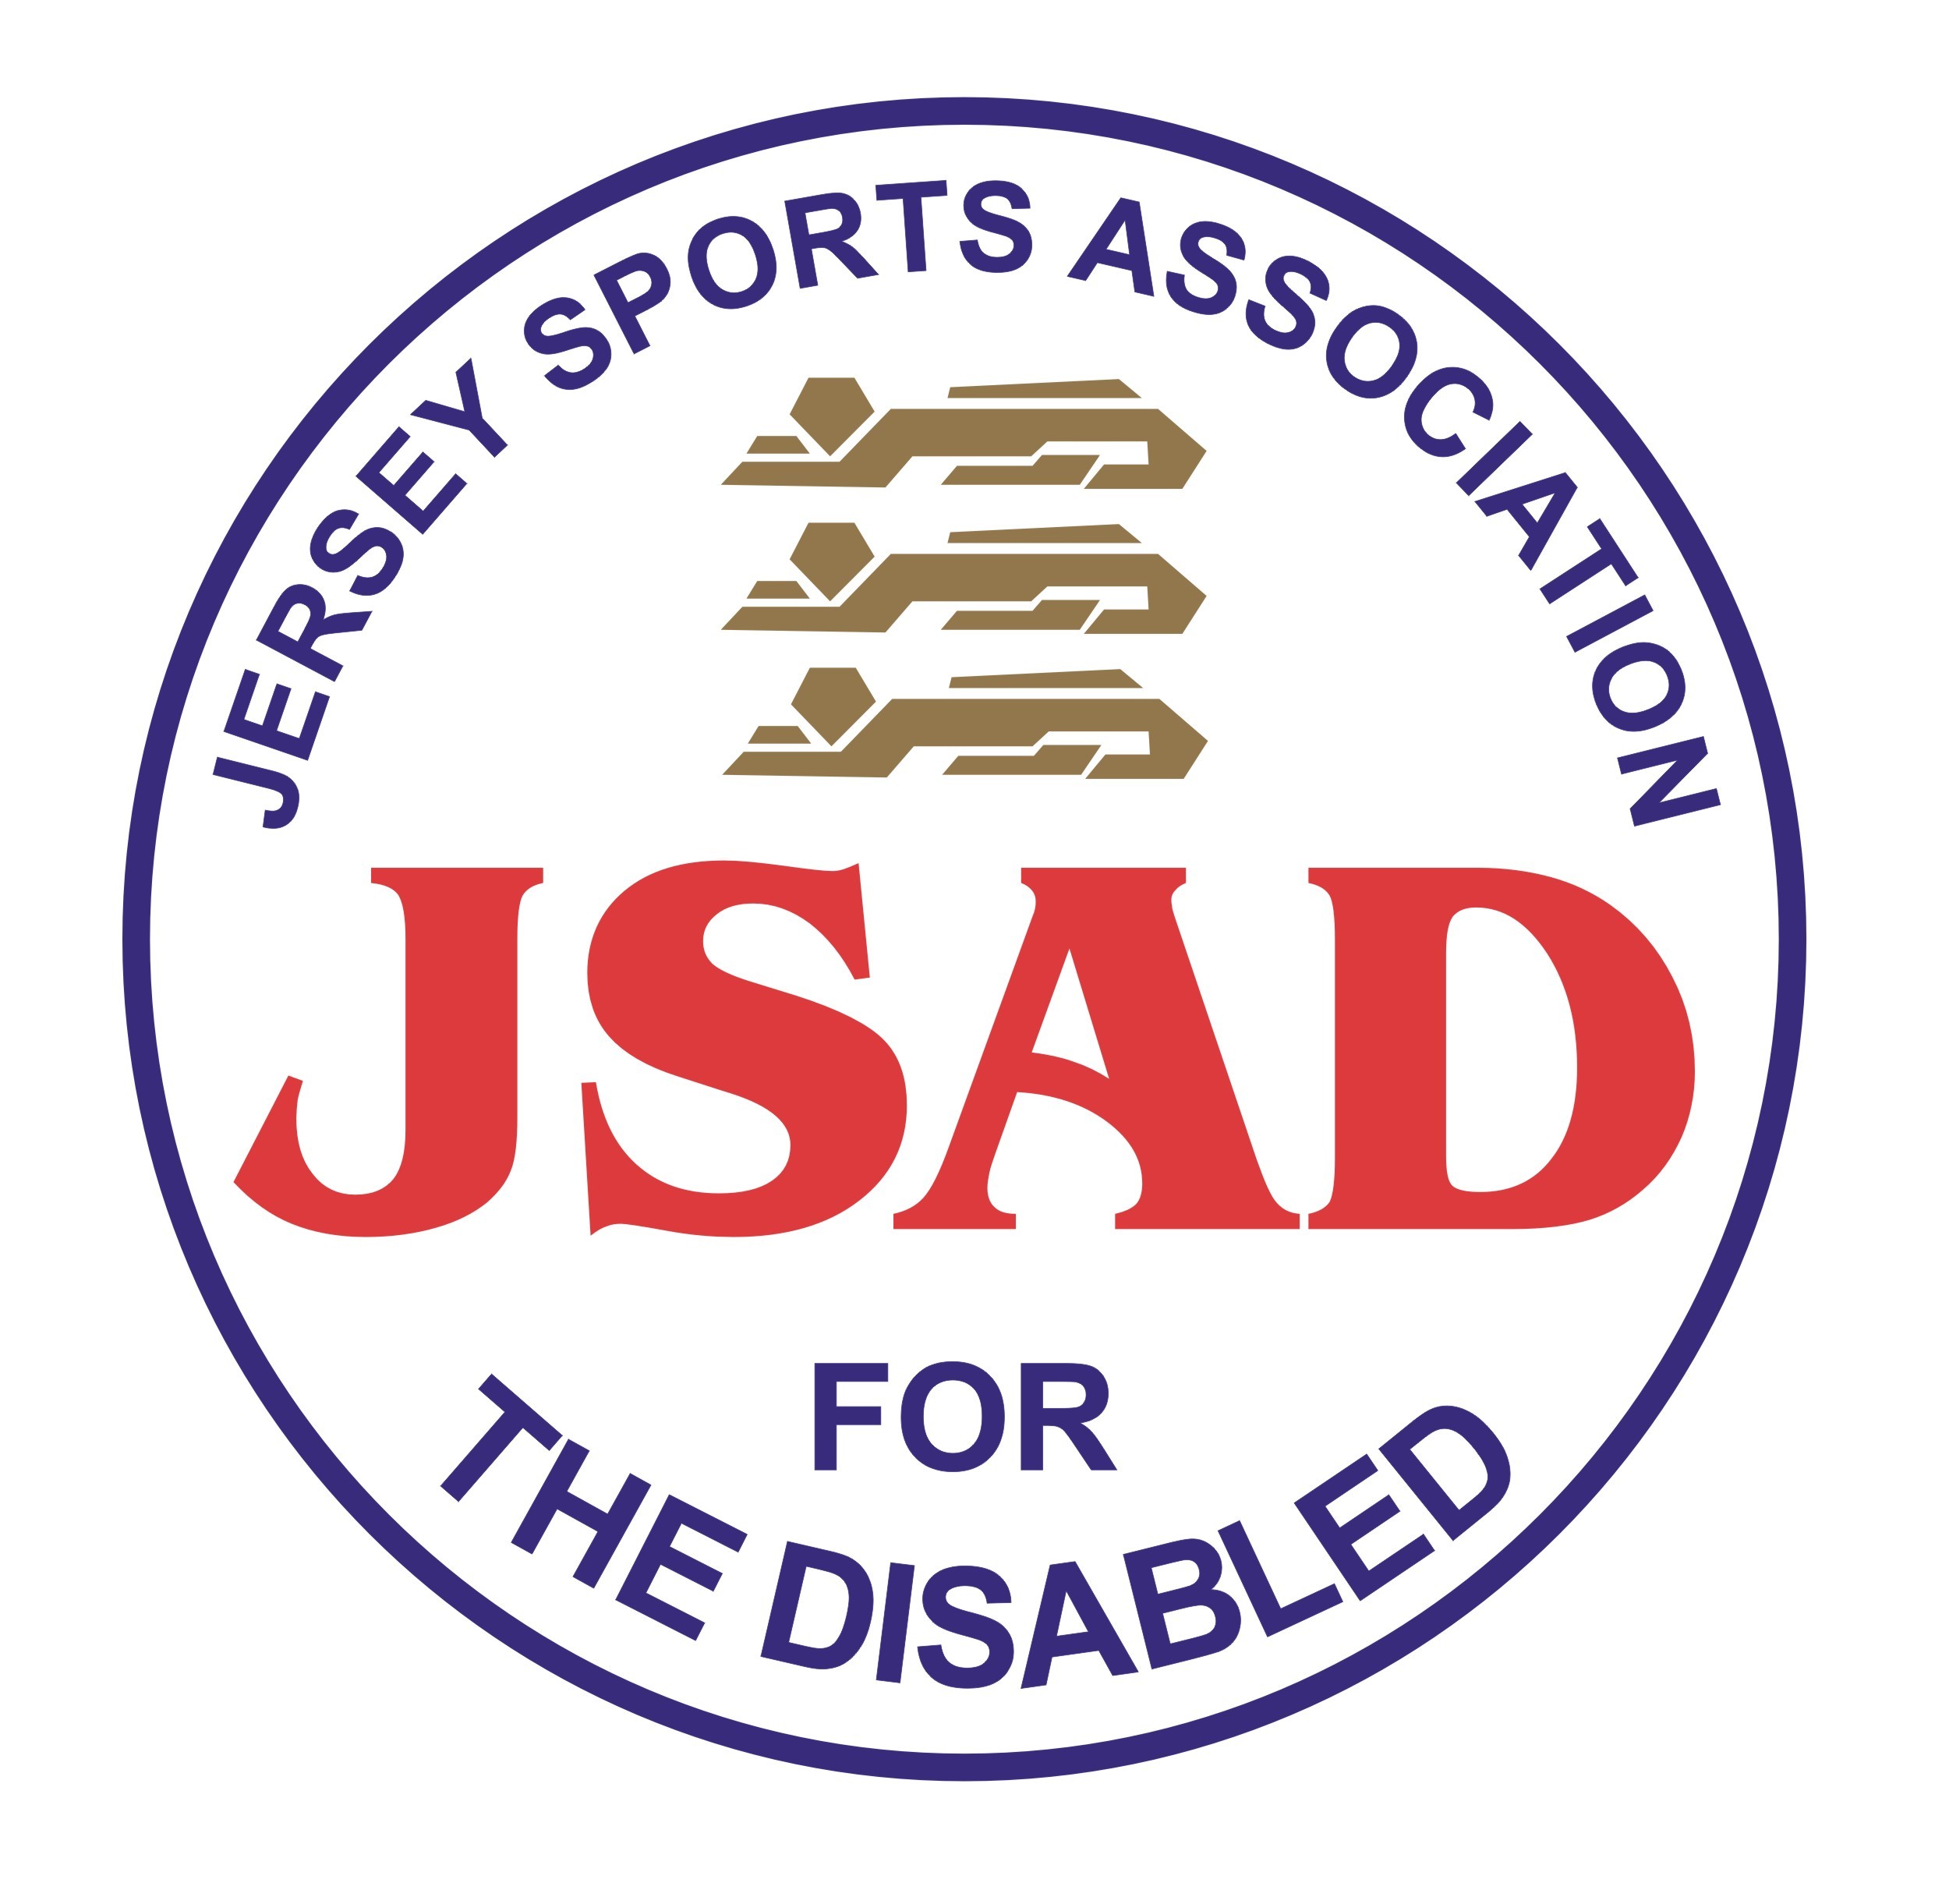 Jersey Sports Association for the Disabled (JSAD)